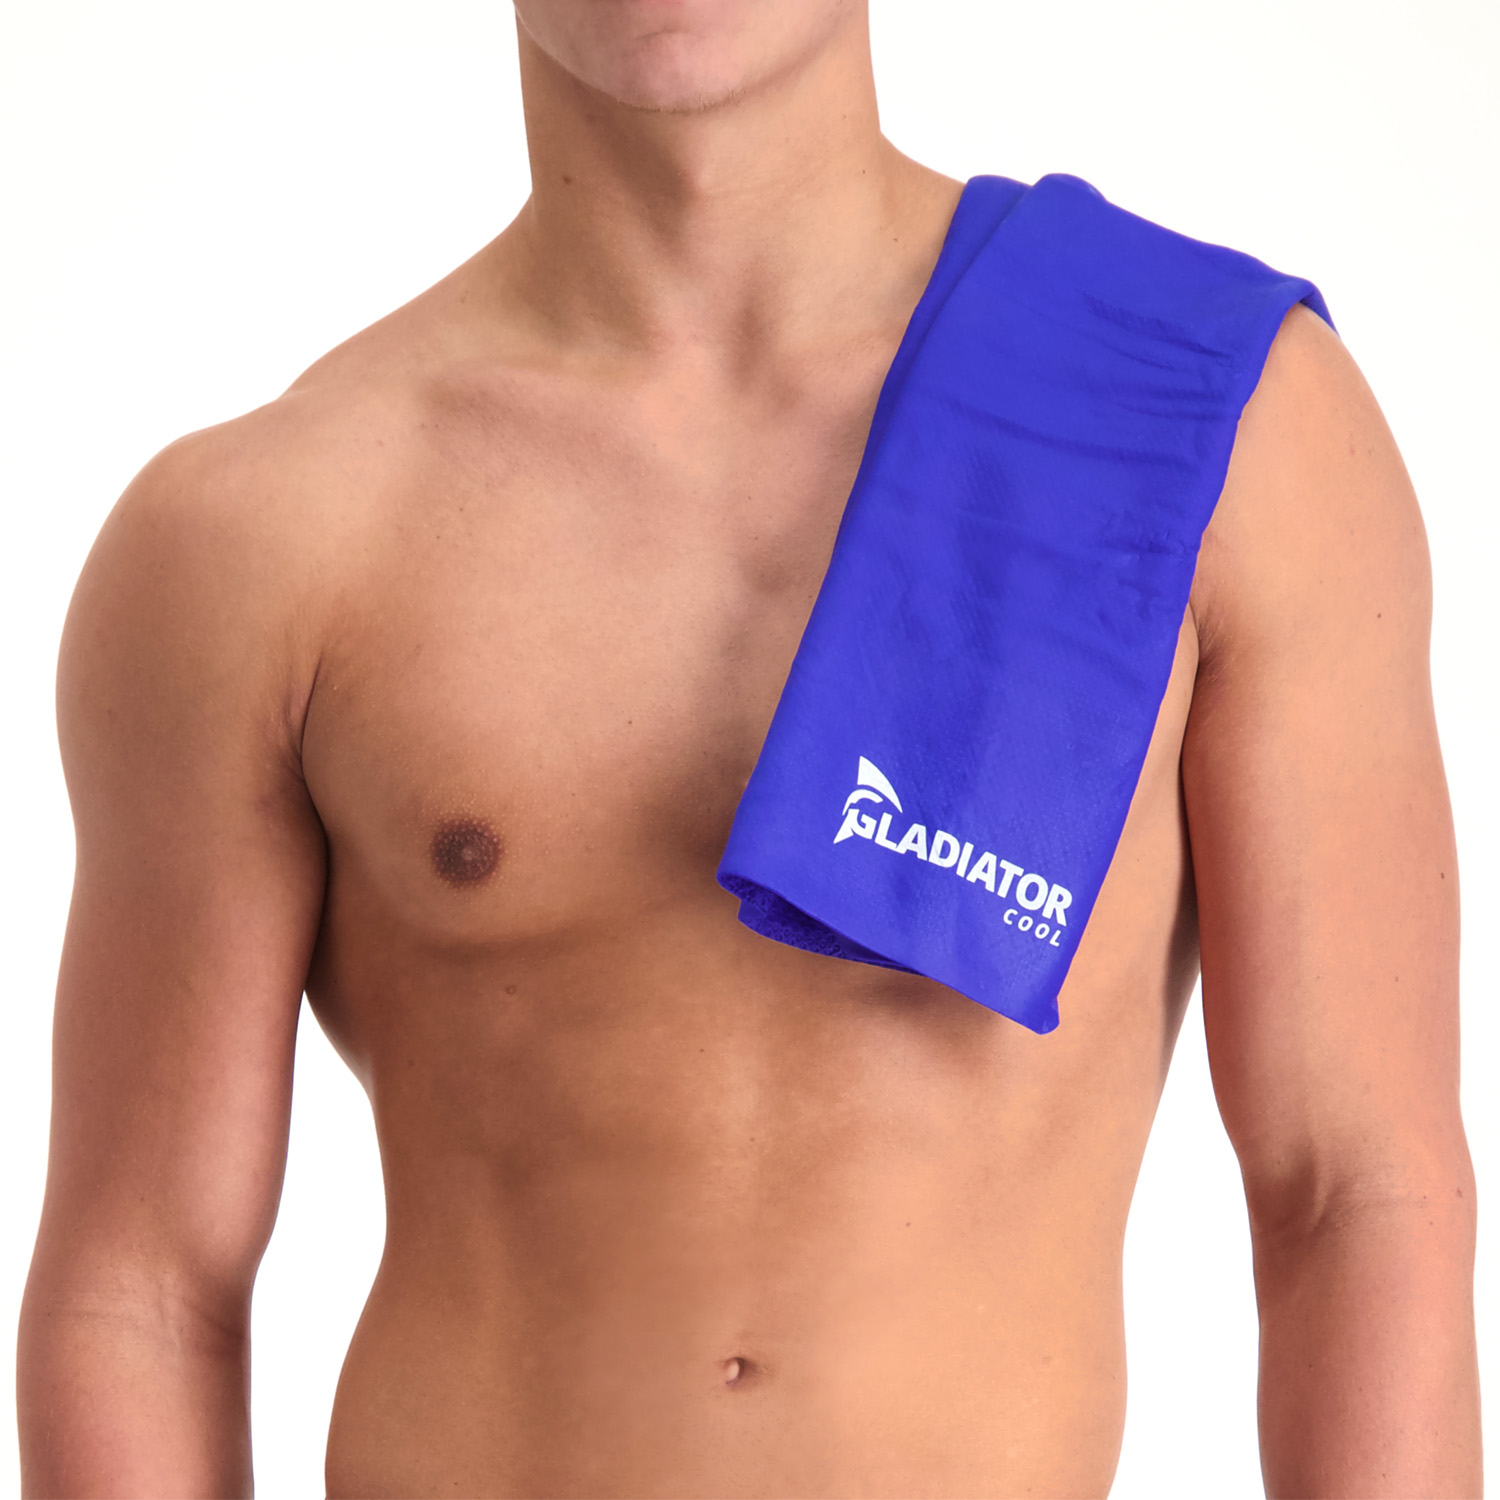 Gladiator Cool - The Cool Towel